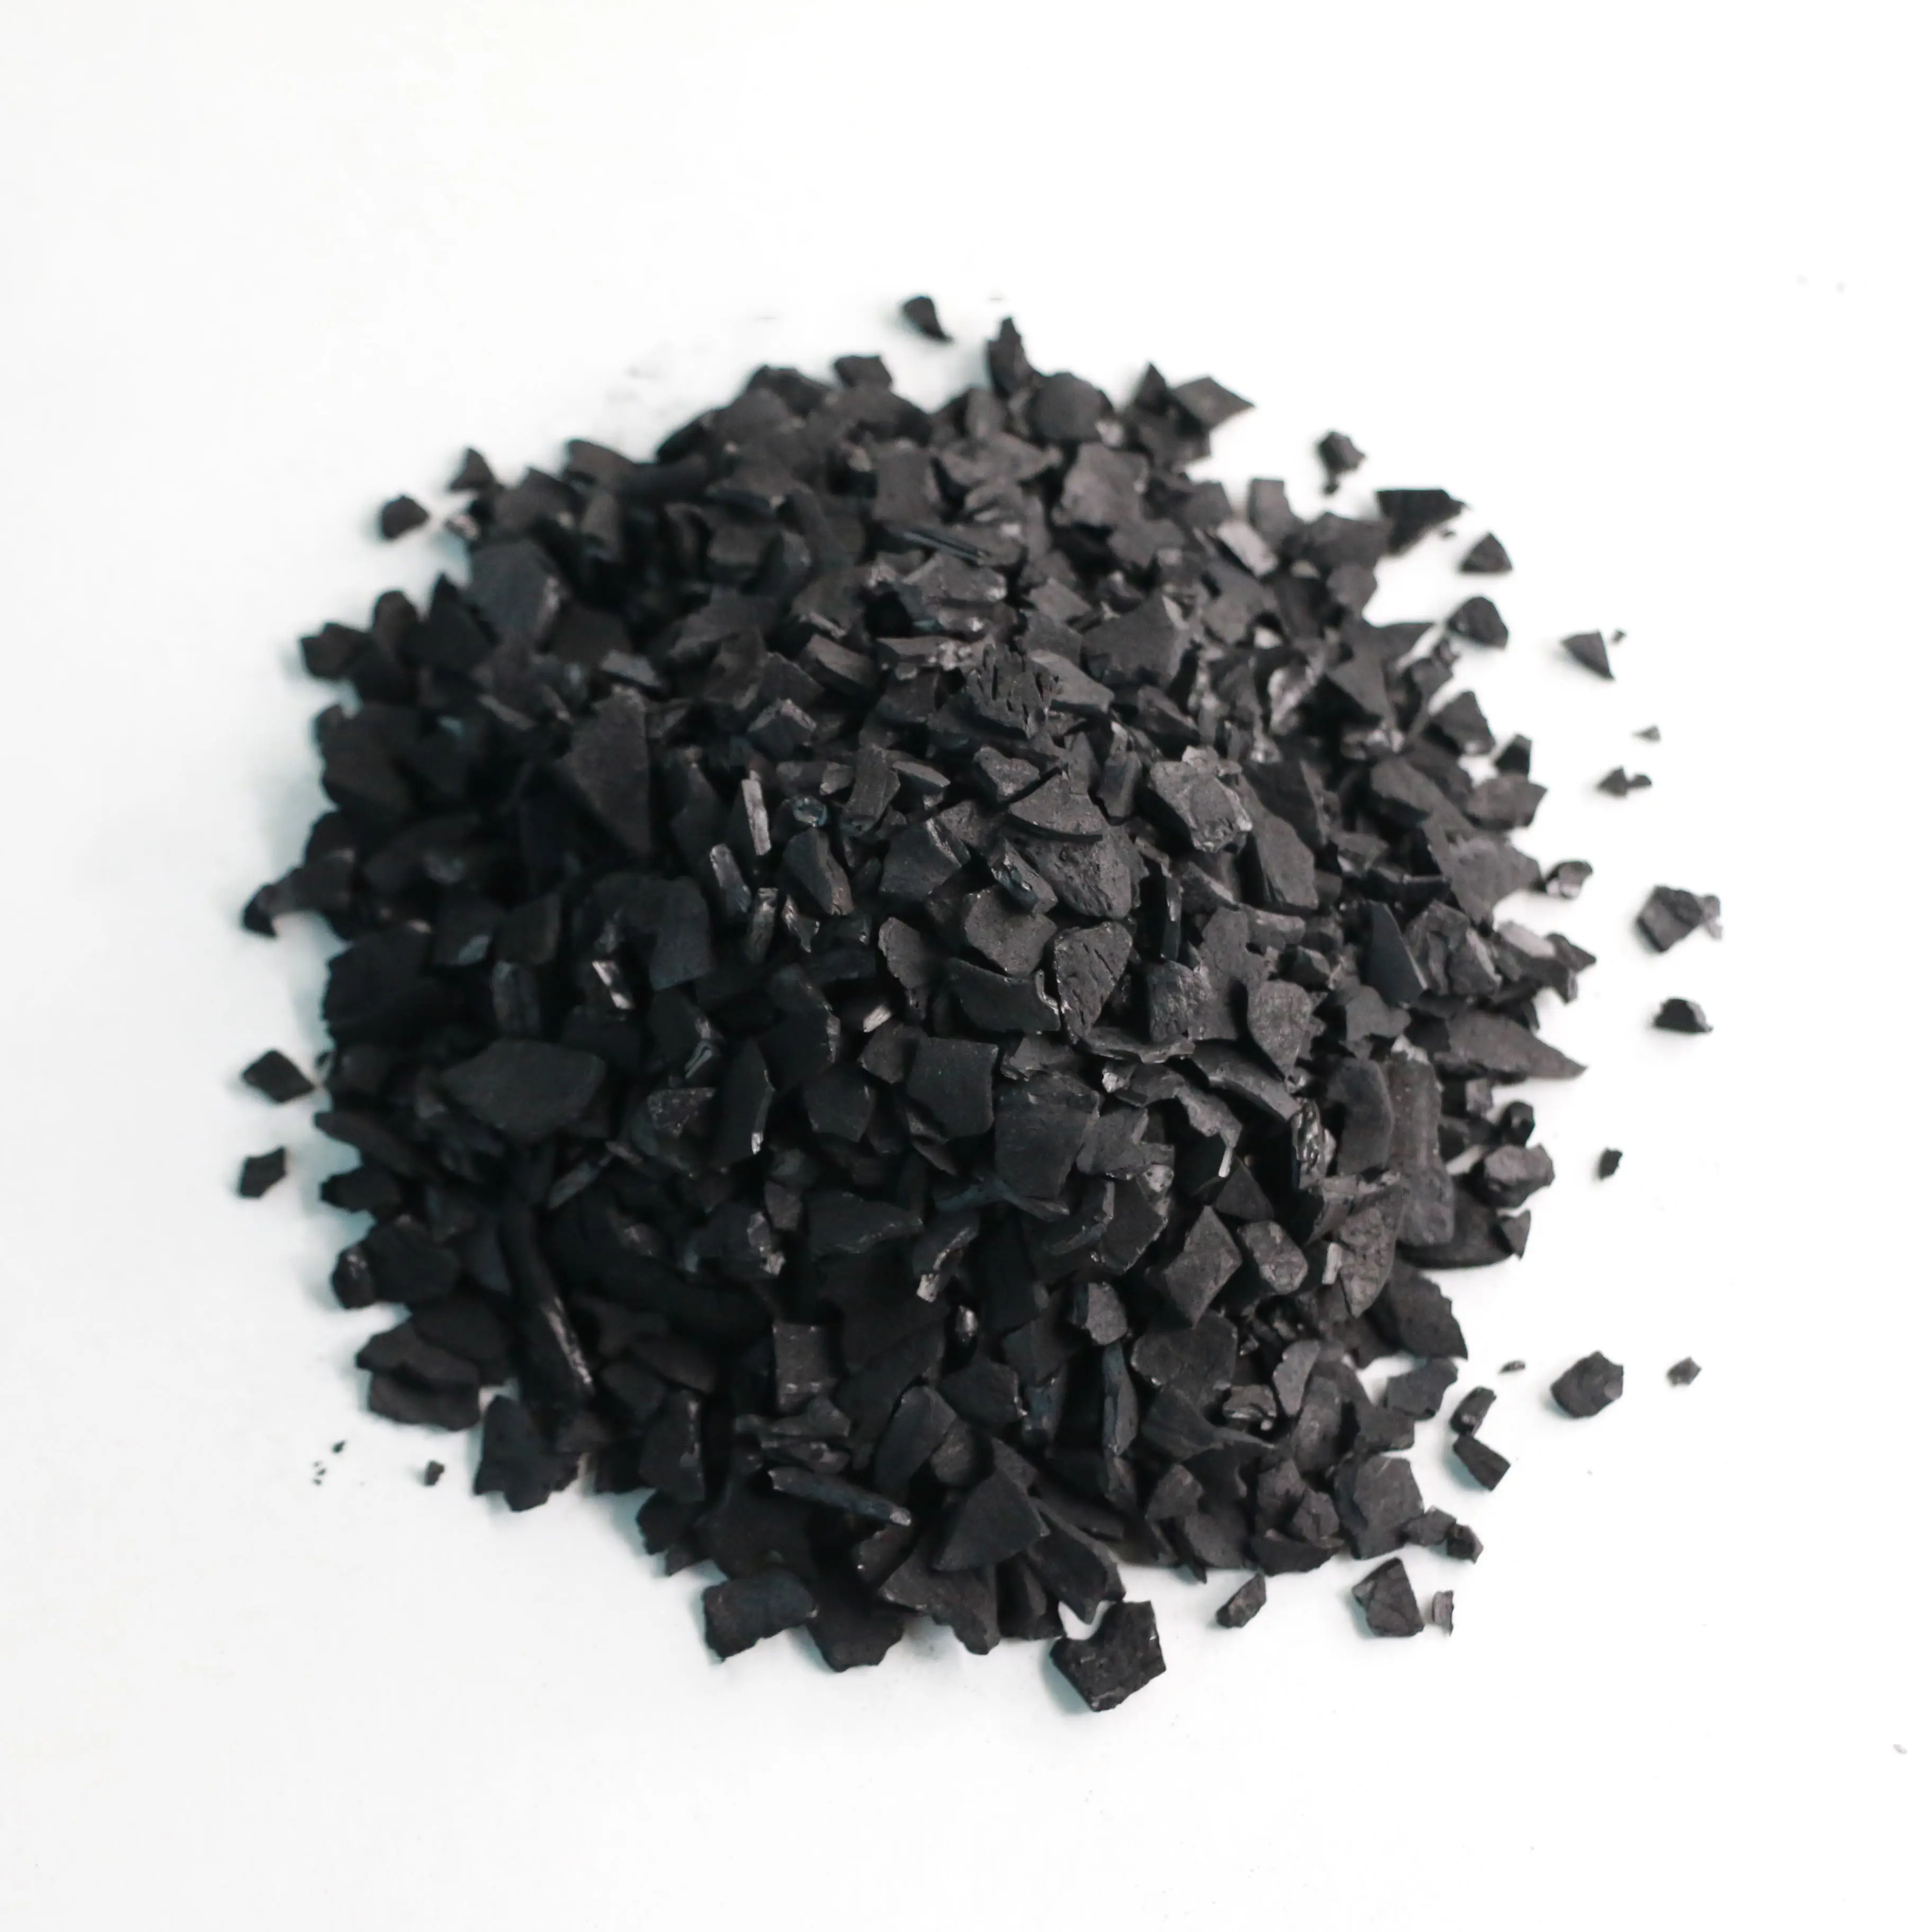 Ssd Chemical Solution Liquid Coconut Shell Activated Carbon For Paper Chemicals Usage Powder Activated Carbon